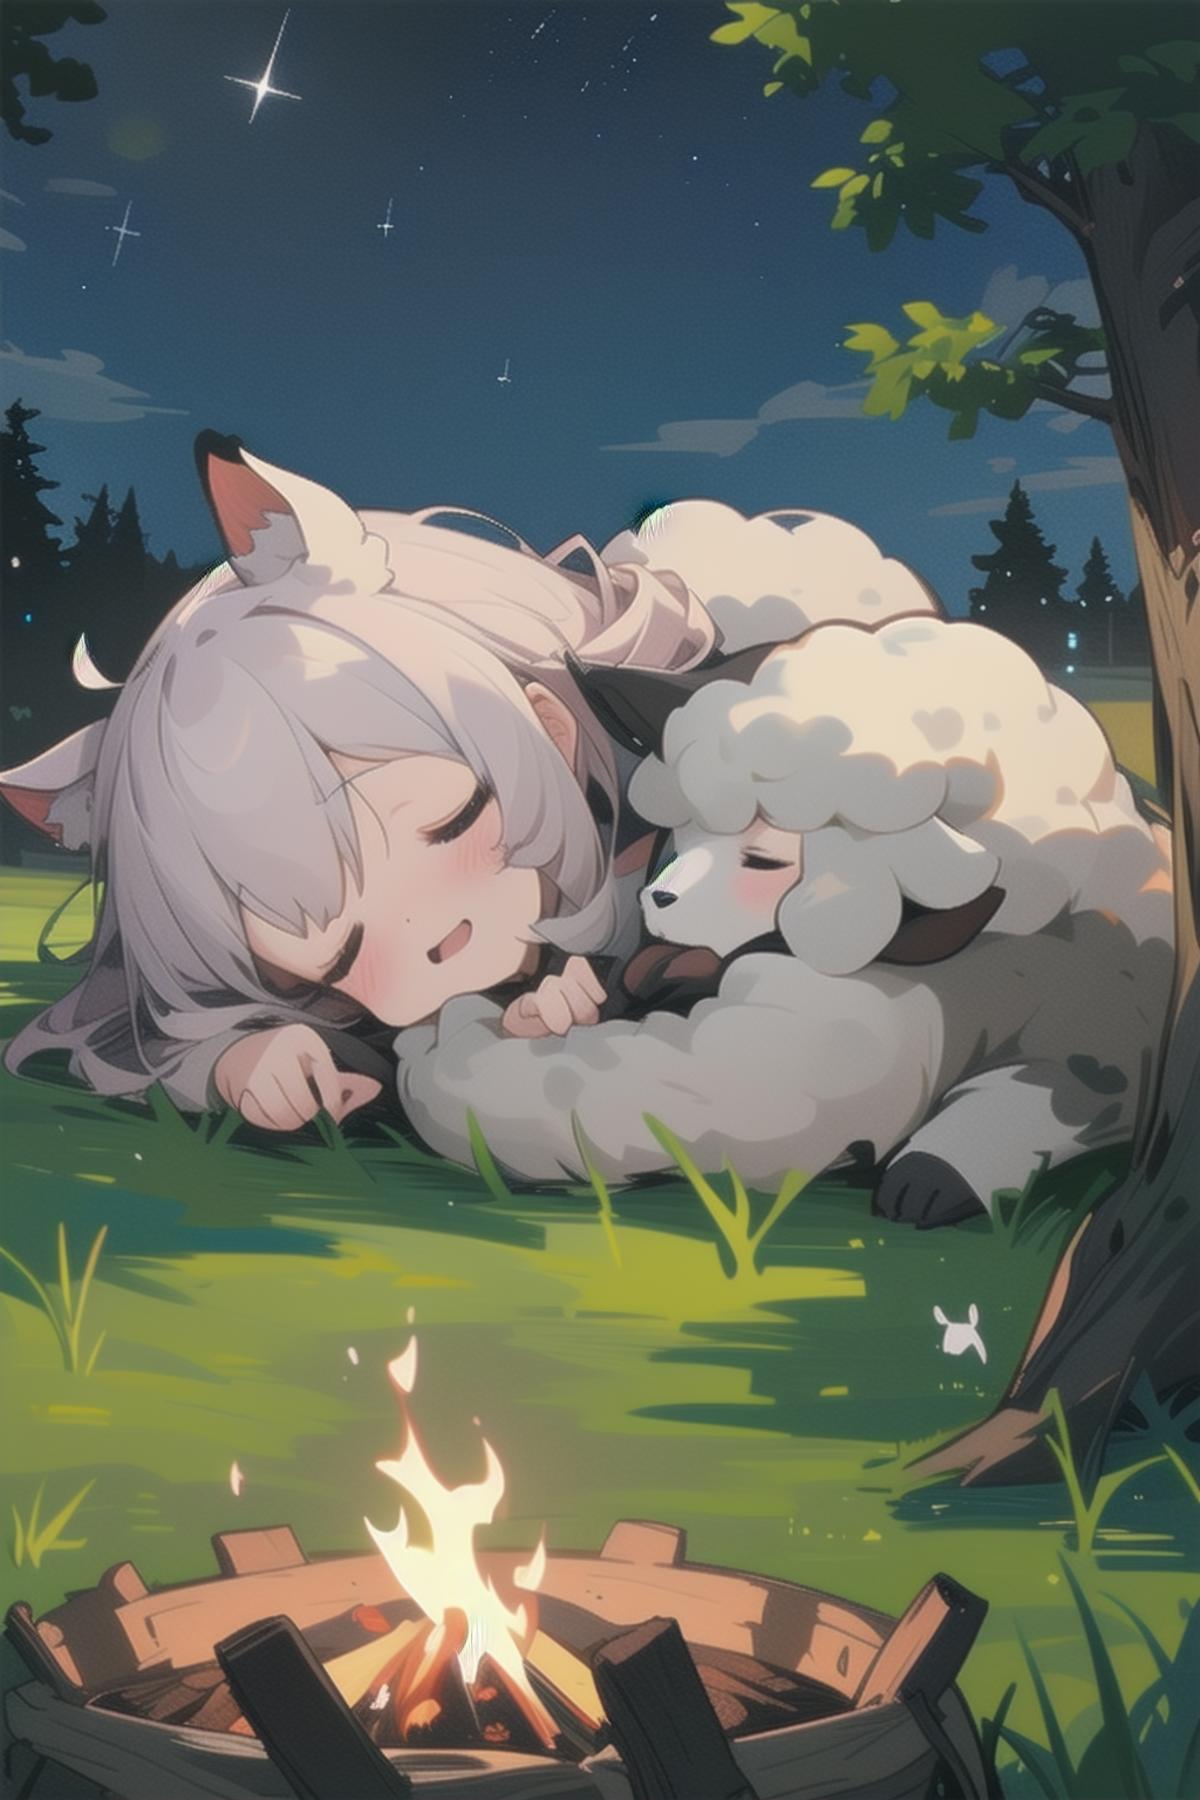 Anime-style cartoon of a wolf sleeping in the grass with a lamb.